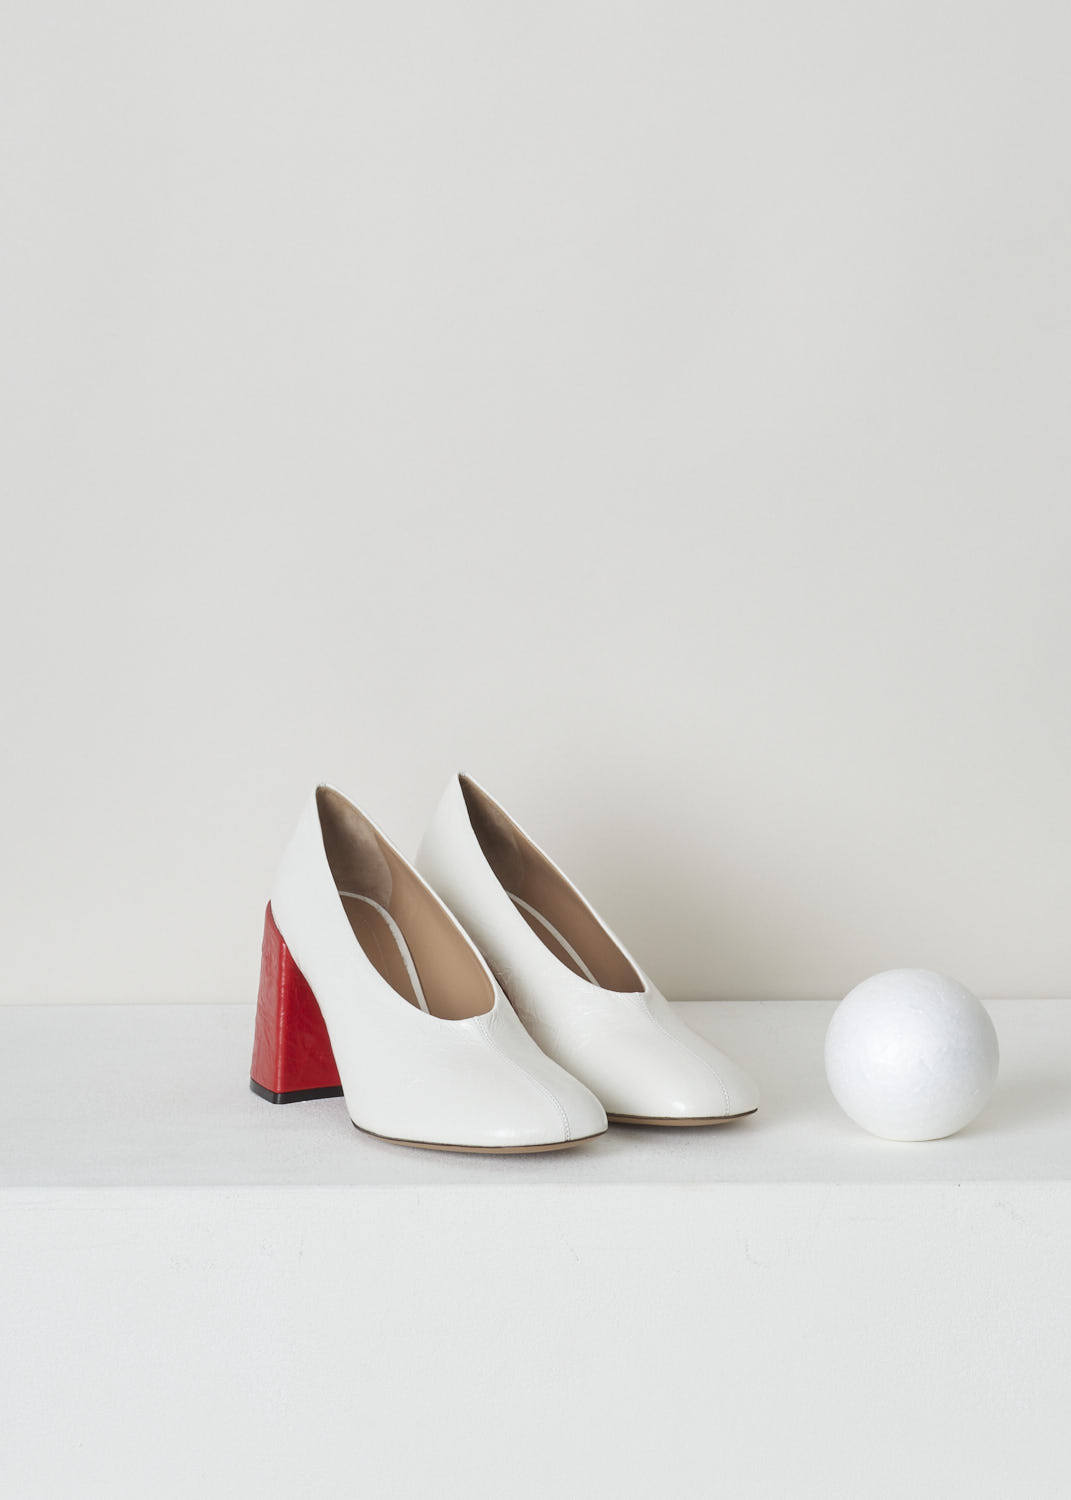 MARNI, WHITE PUMP WITH CONTRASTING RED HEEL, PUMS001609_LV801_00W01, White, Red, Front, These white pumps have a round nose with a decorative seam and a contrasting red block heel. What sets these pumps apart is the crinkled finish throughout the shoe.

Heel height: 9.5 cm / 3.7 inch
